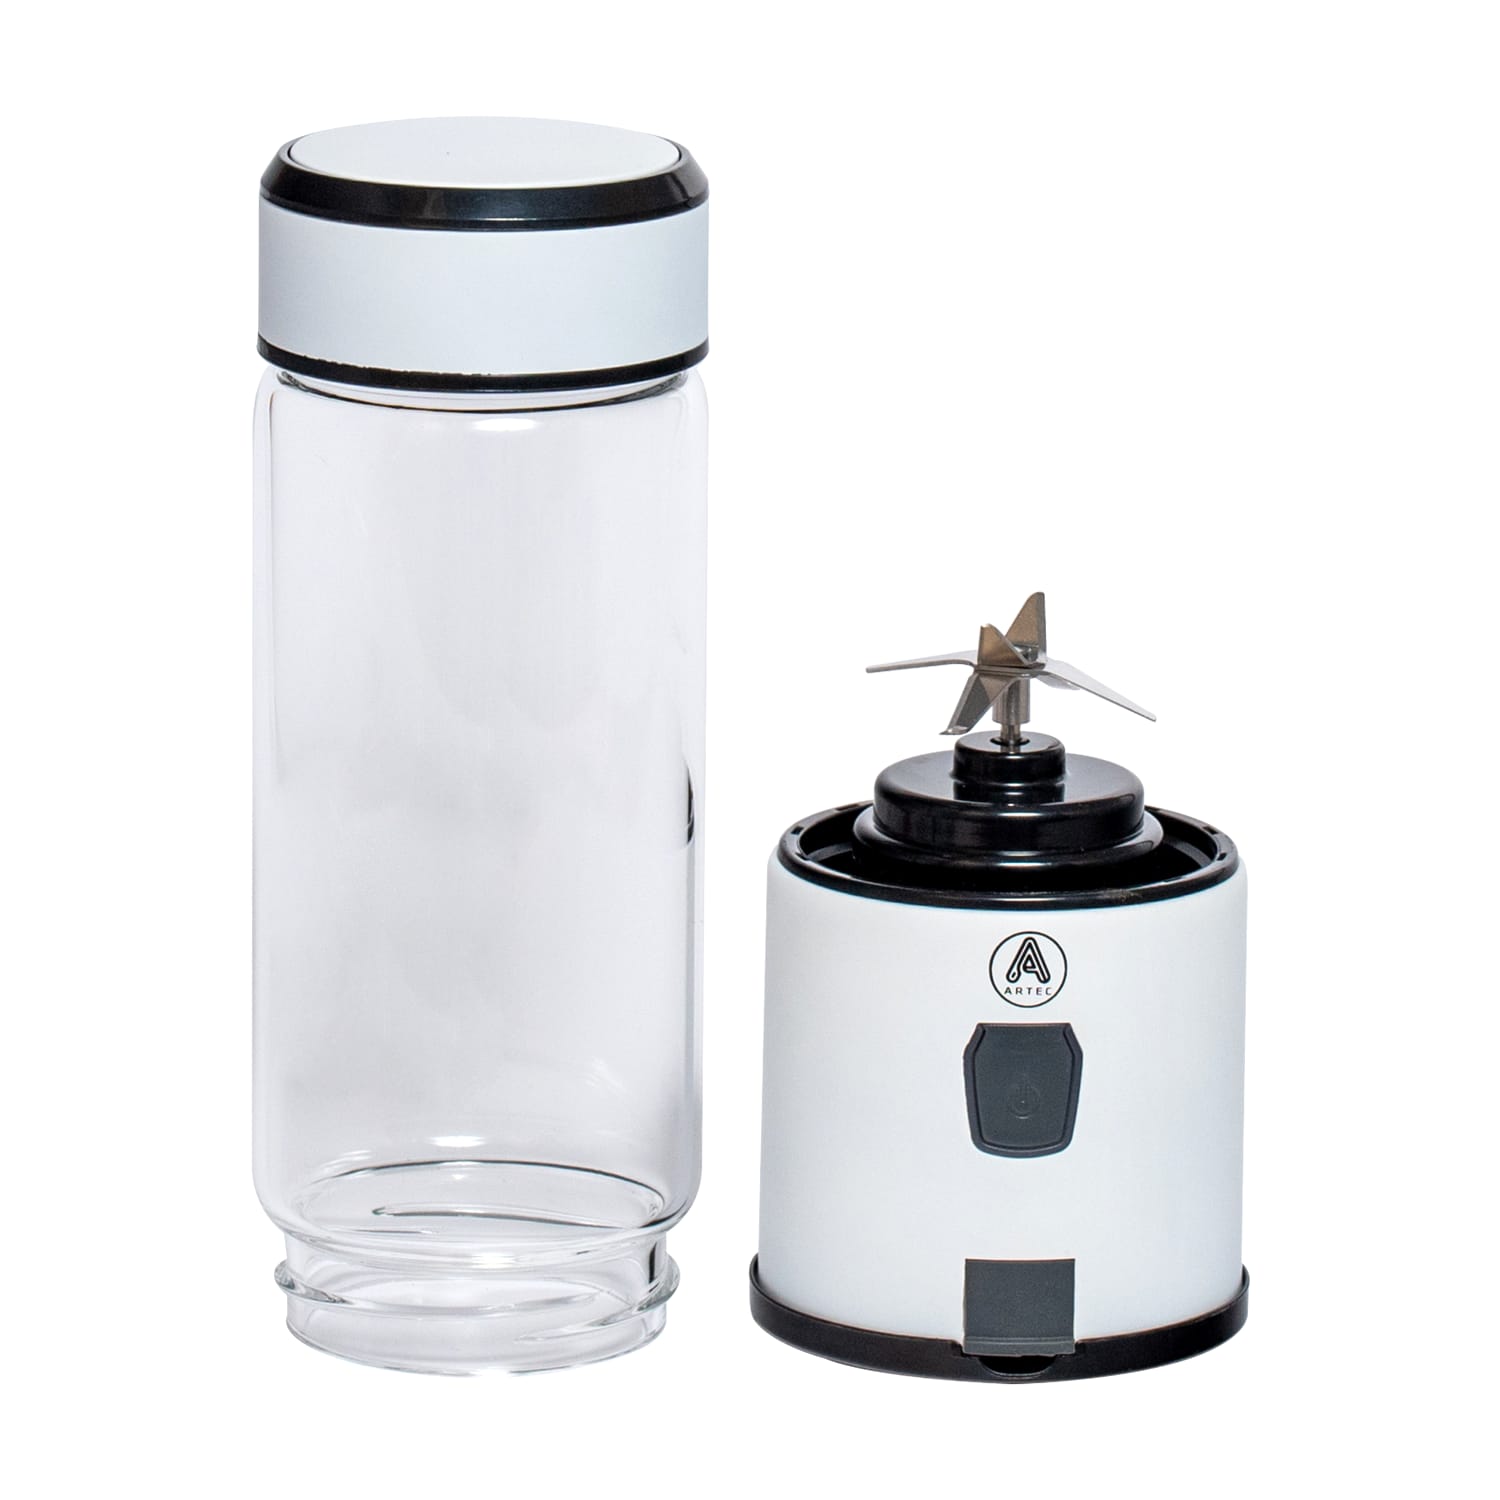 Portable blender with USB power supply